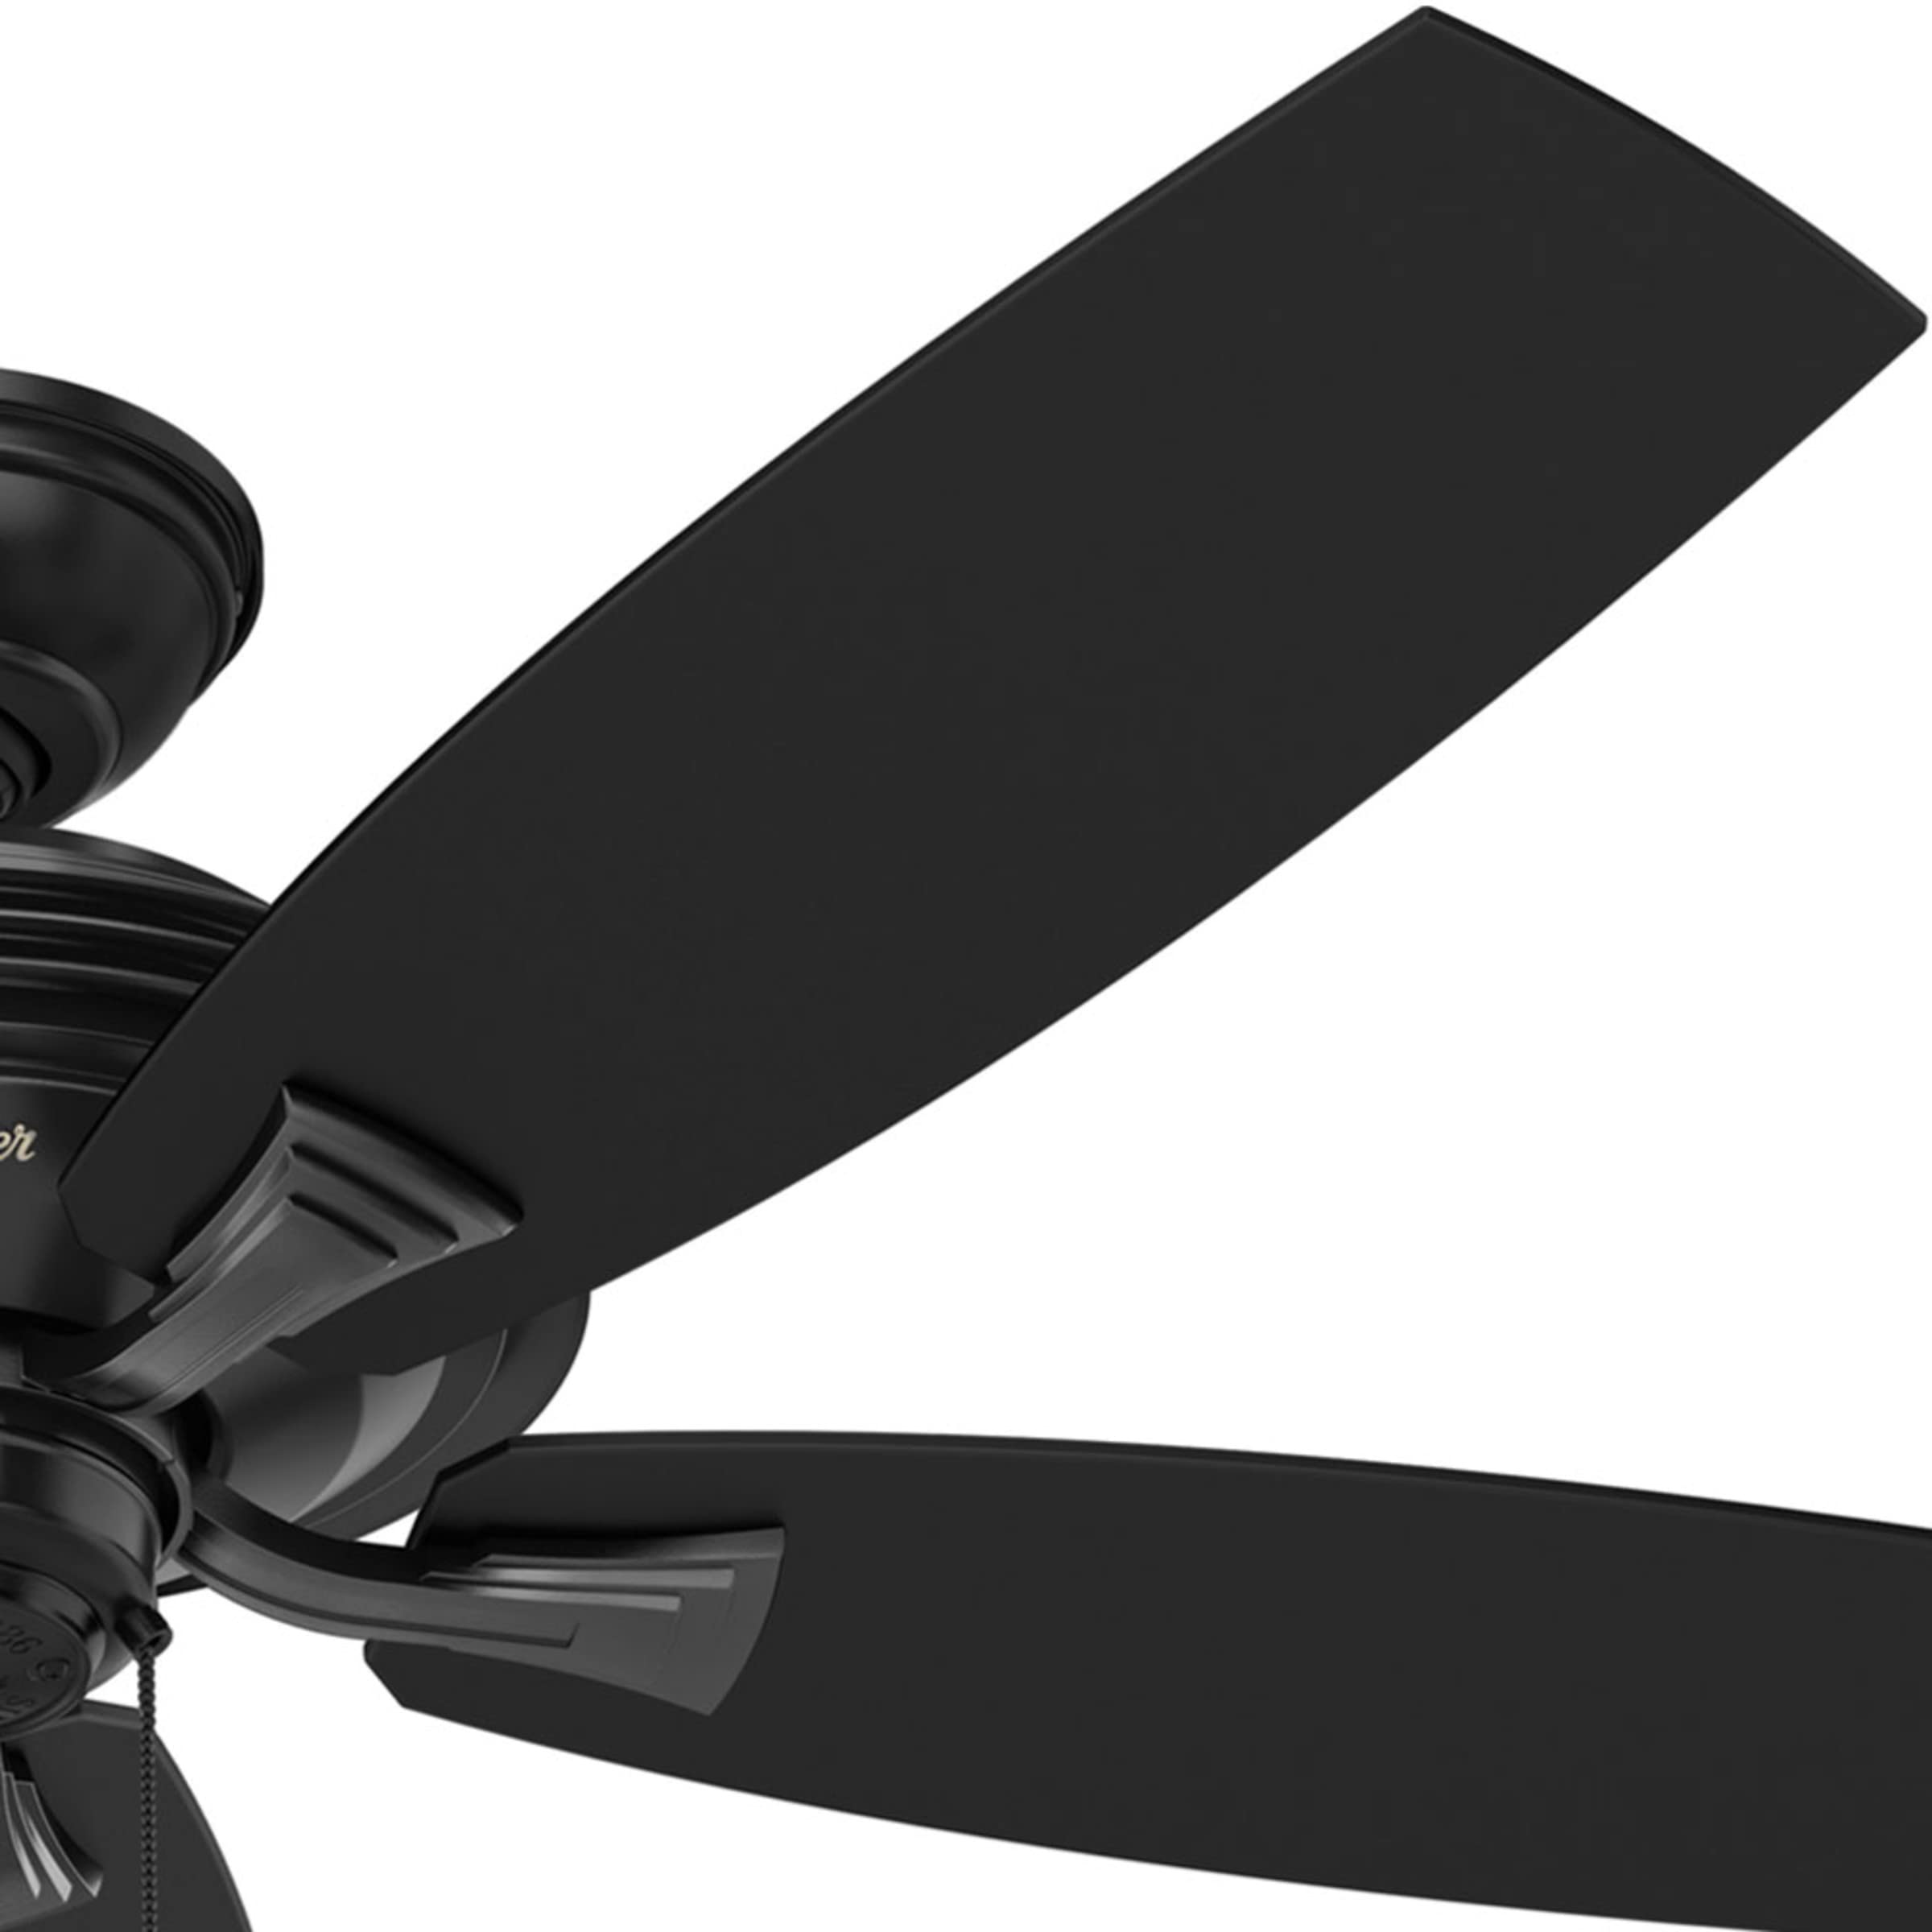 Hunter Fan Company, 53348, 52 inch Rainsford Matte Black Indoor/Outdoor Ceiling Fan and Pull Chain